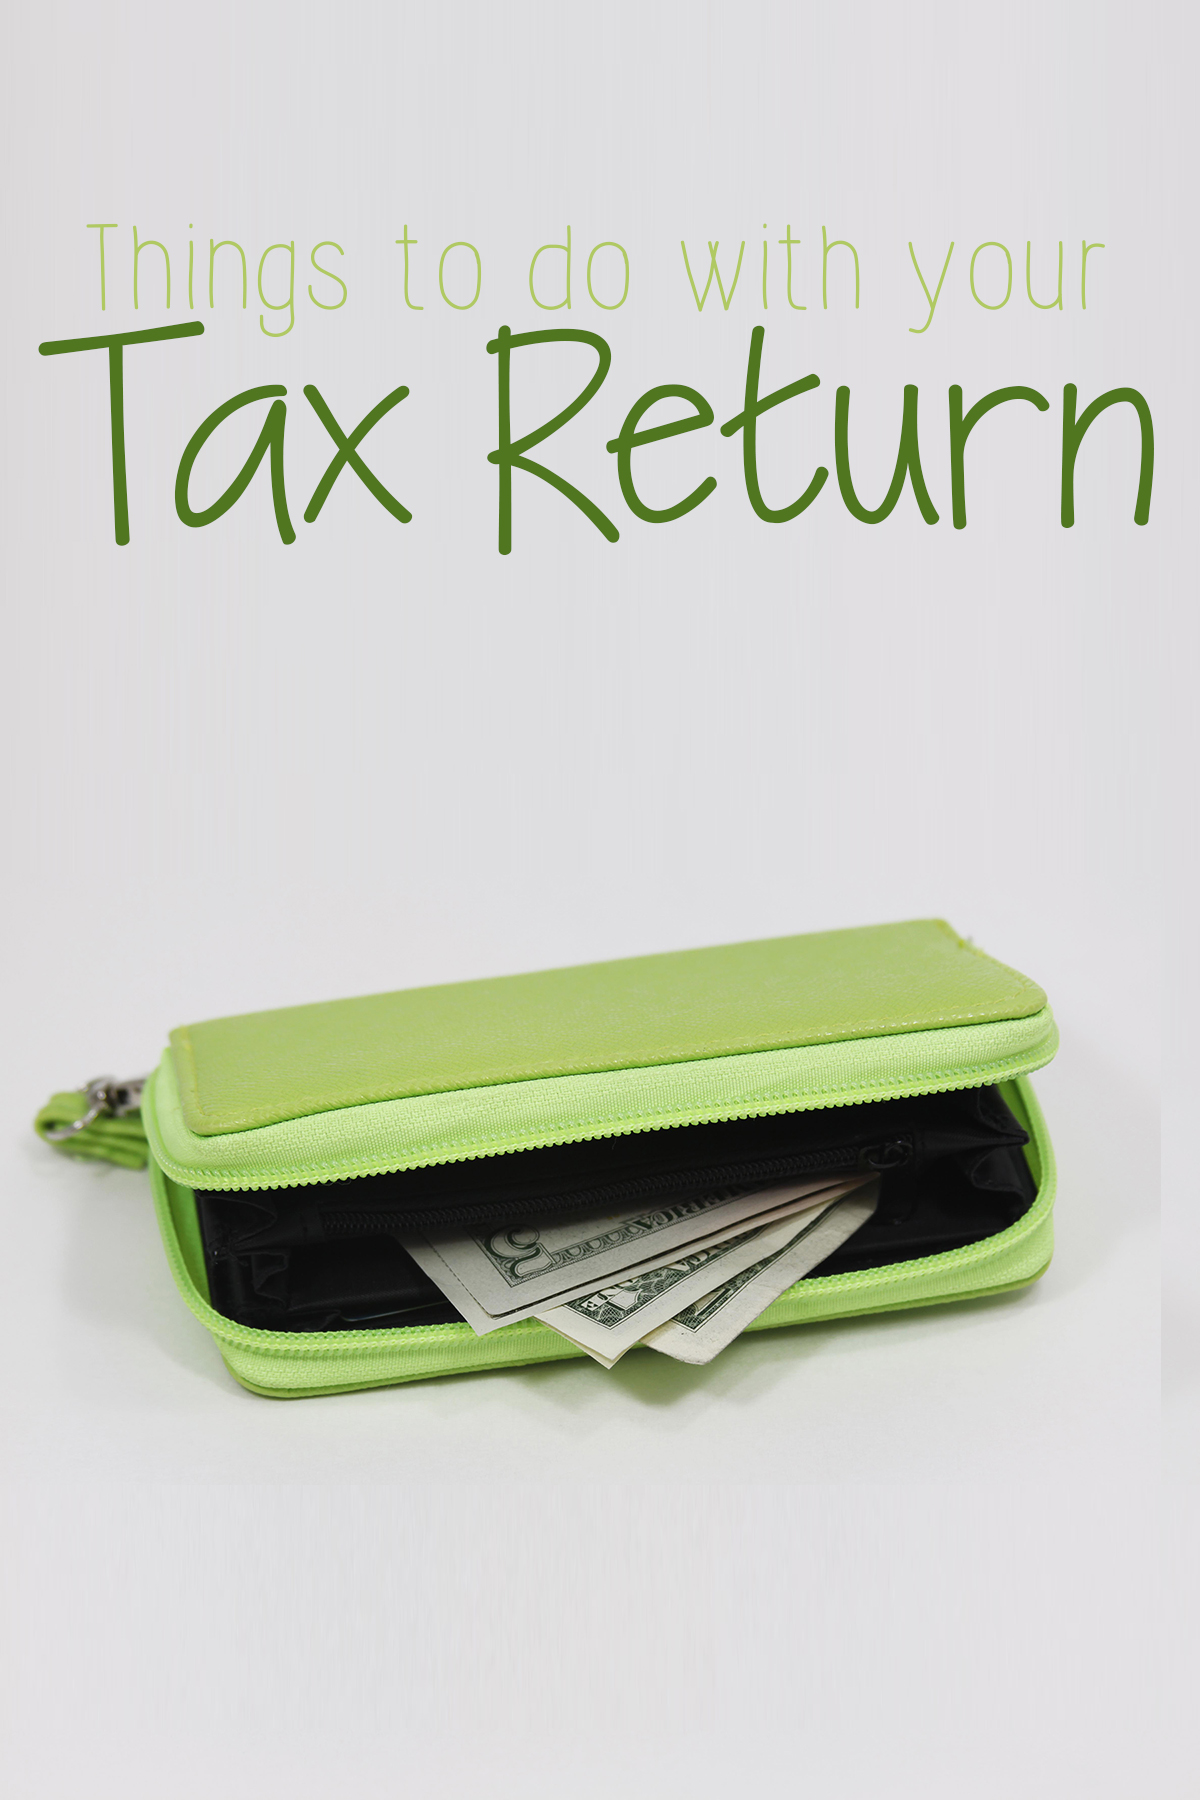 Your tax return has arrived! Now what? Here are some ideas of things to do with your Tax Return that can set you on the right path for a great year ahead.